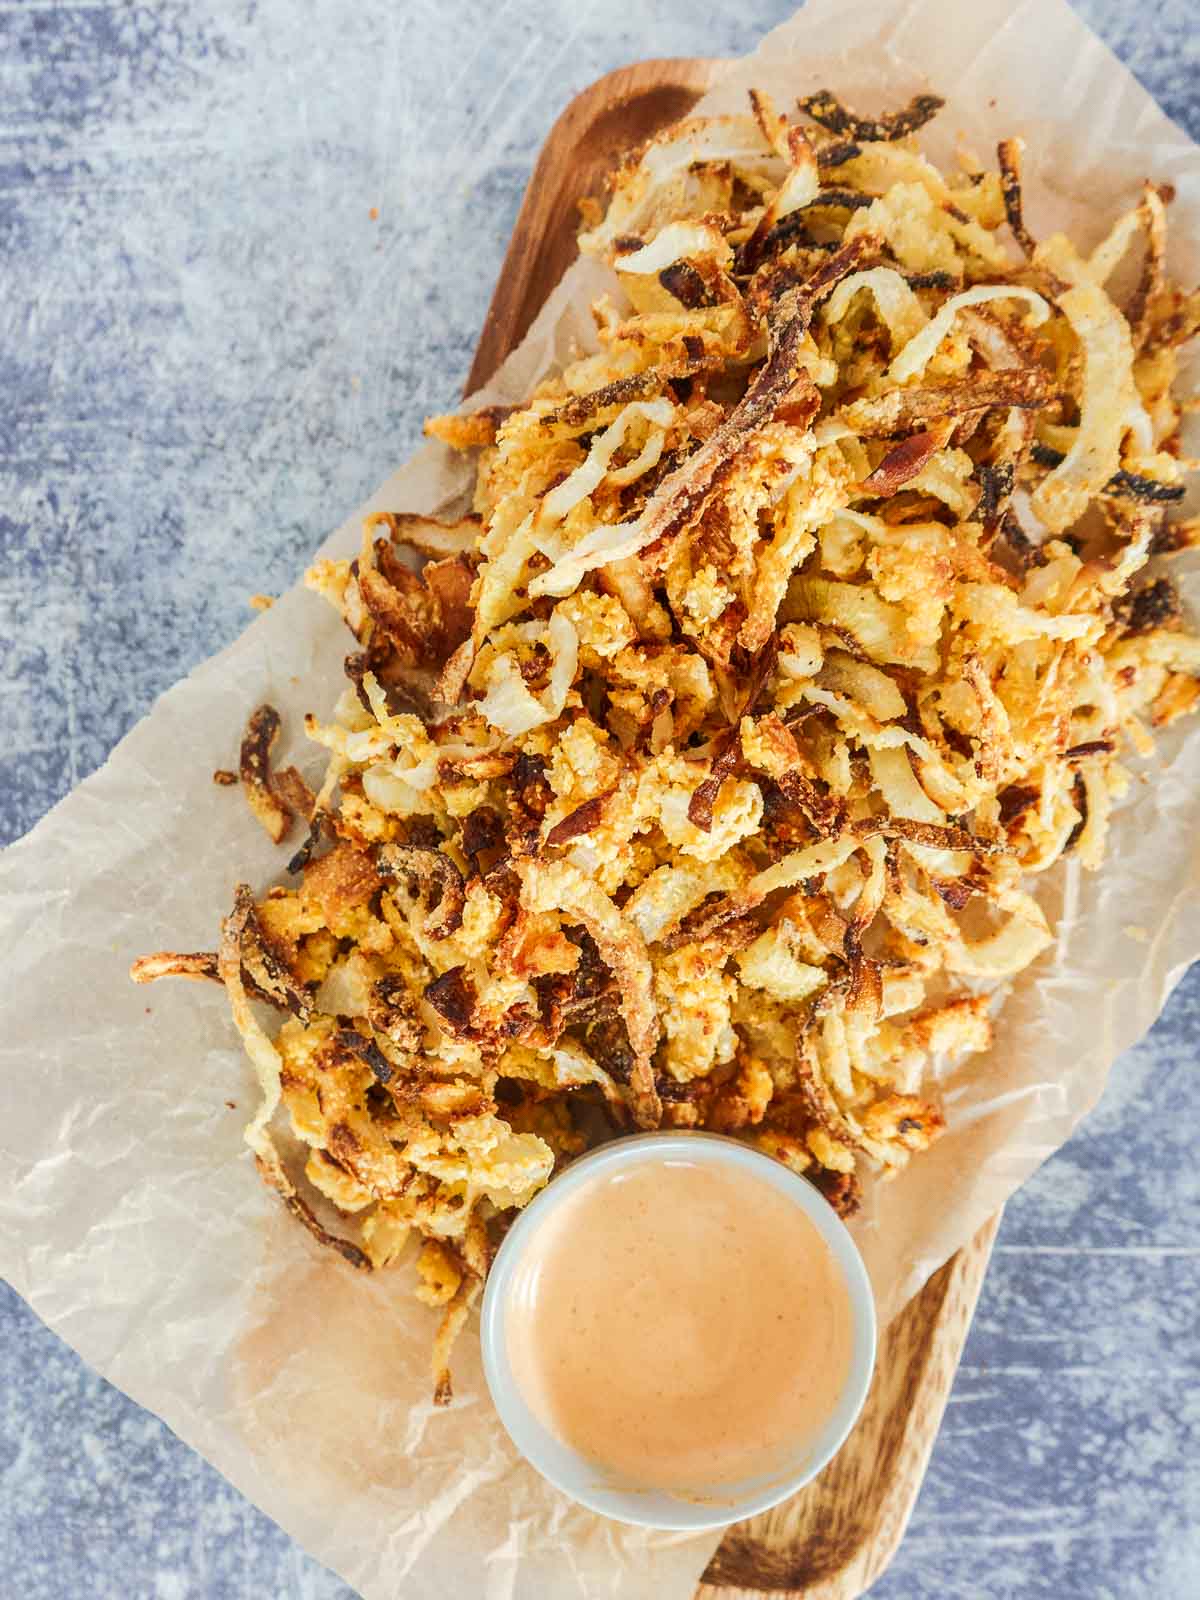 gluten free French fried onions with siracha mayo